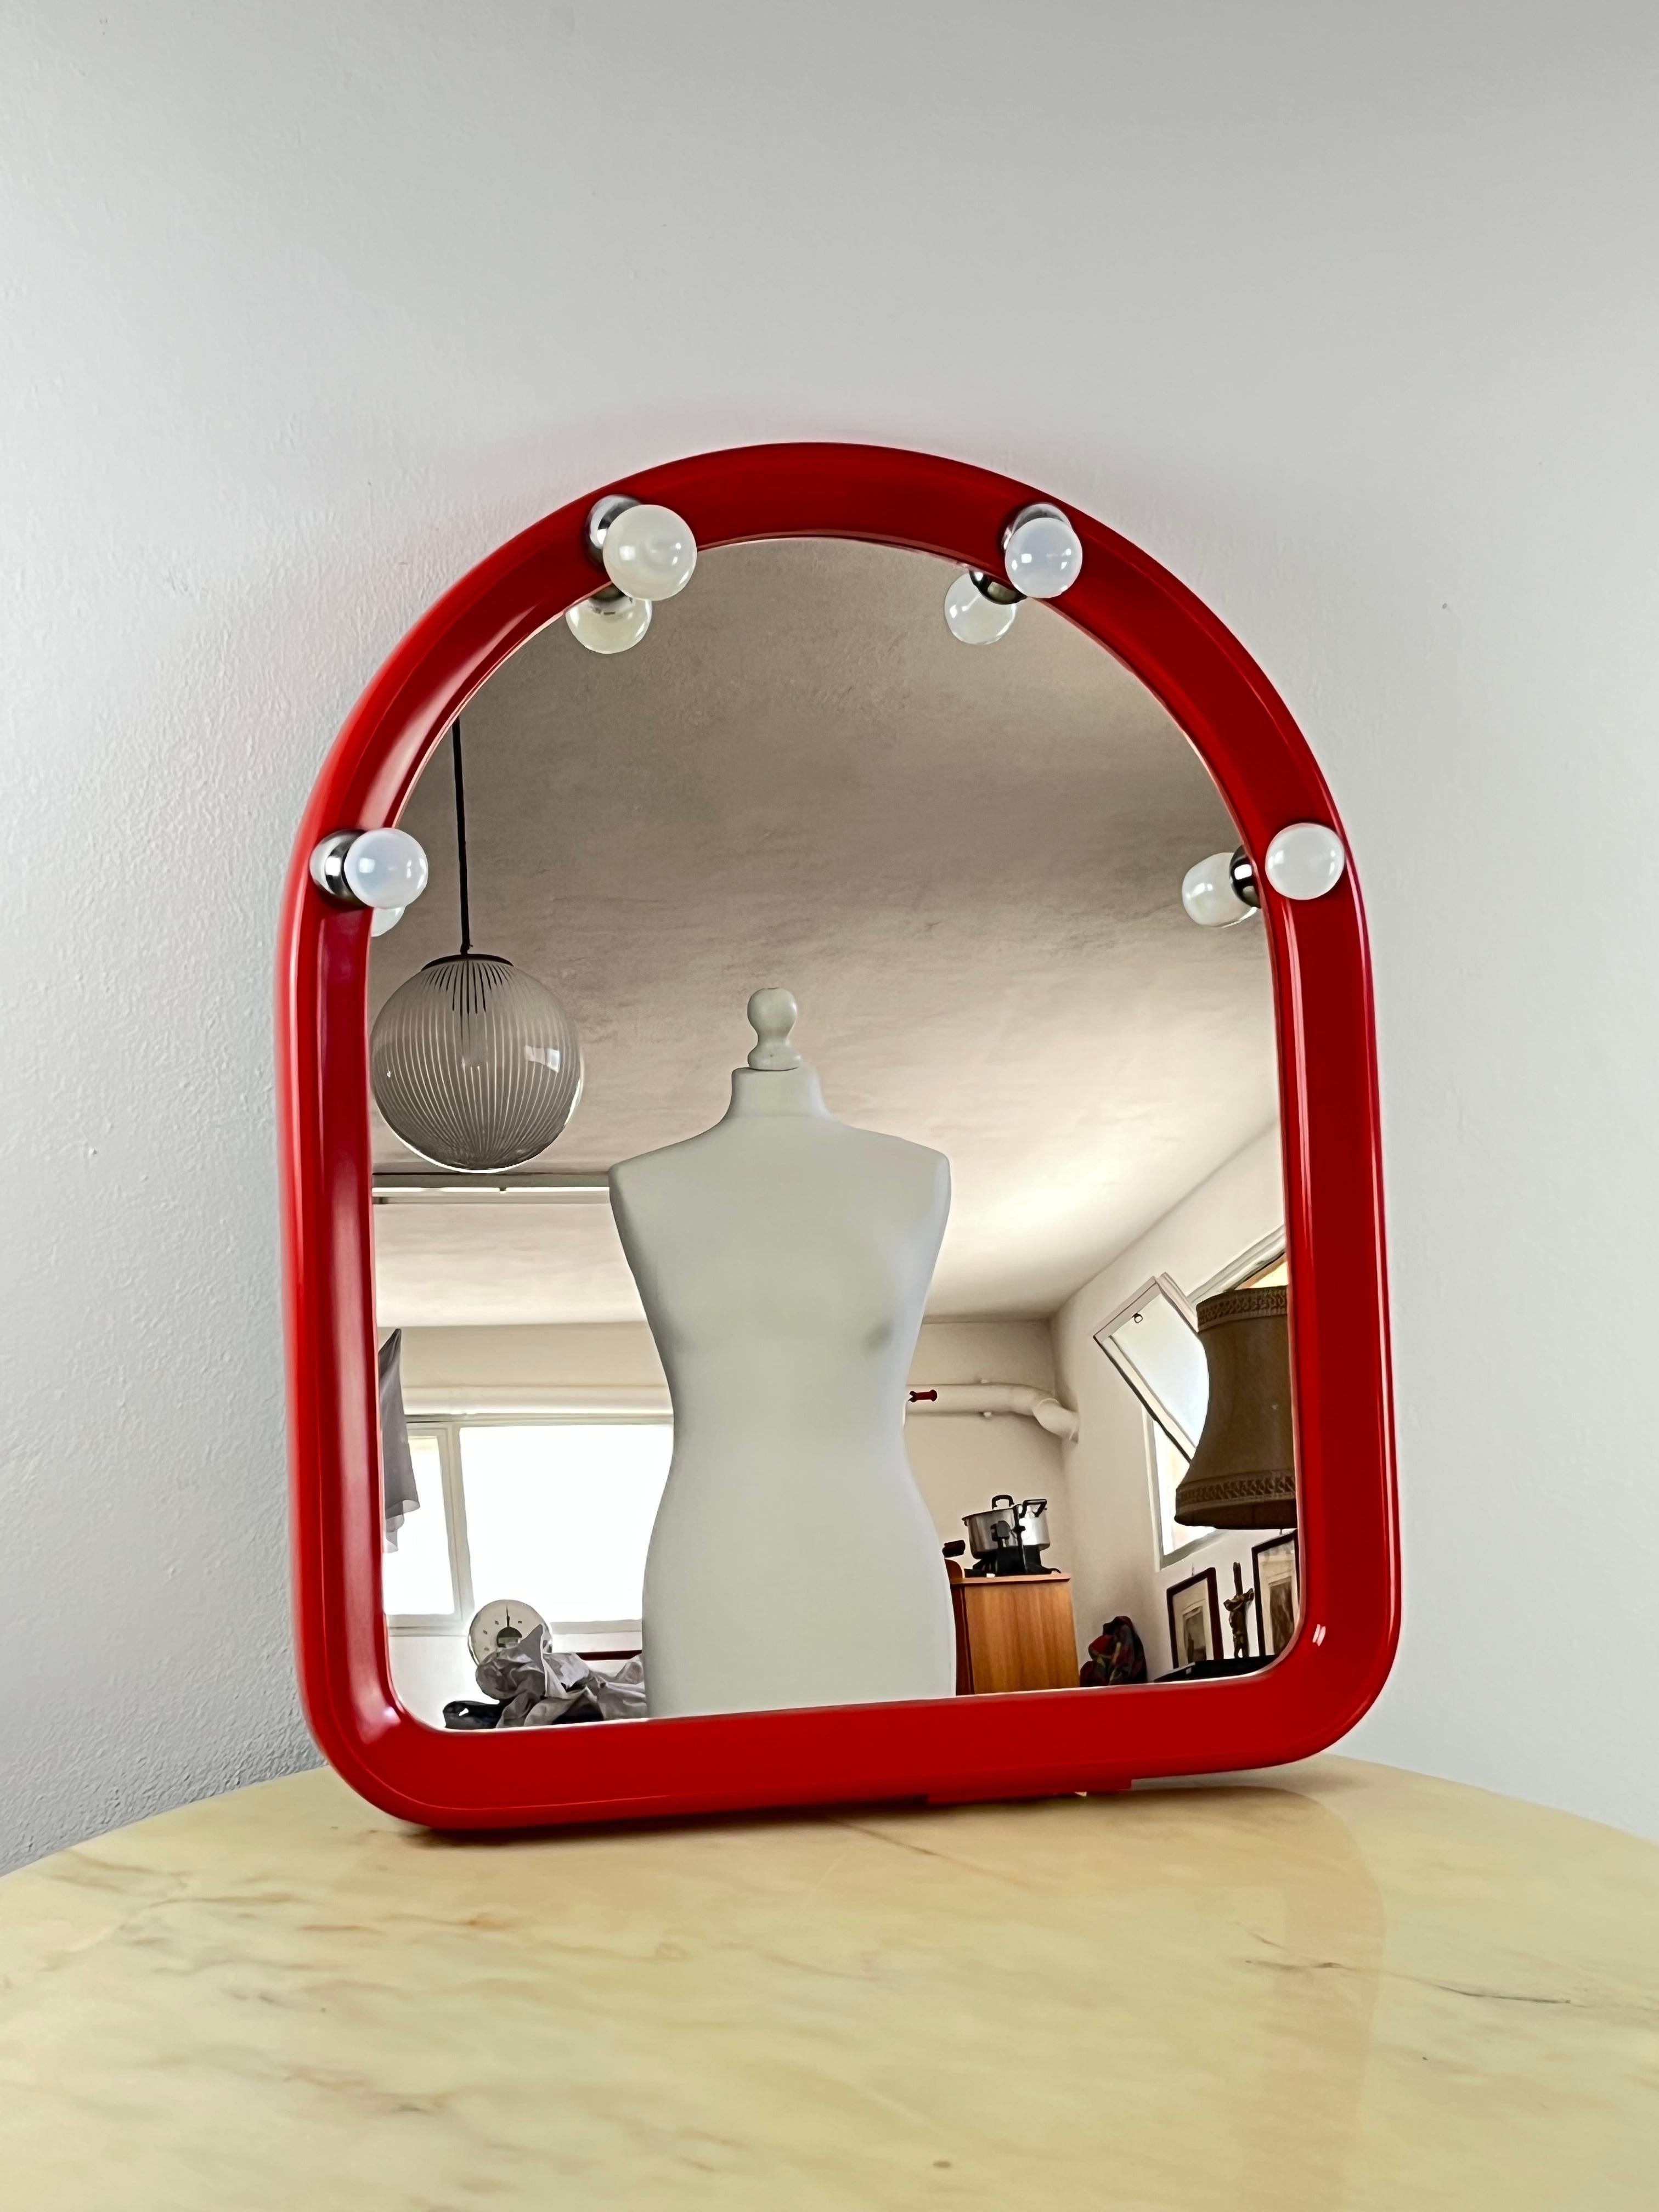 Vintage 9-piece set, mirror and bathroom accessories in red plastic, Italy, 70s
Found in a villa in a well-known Sicilian seaside resort, it is made up of a mirror with lights and an electrical outlet and what you see in the photo. Intact and